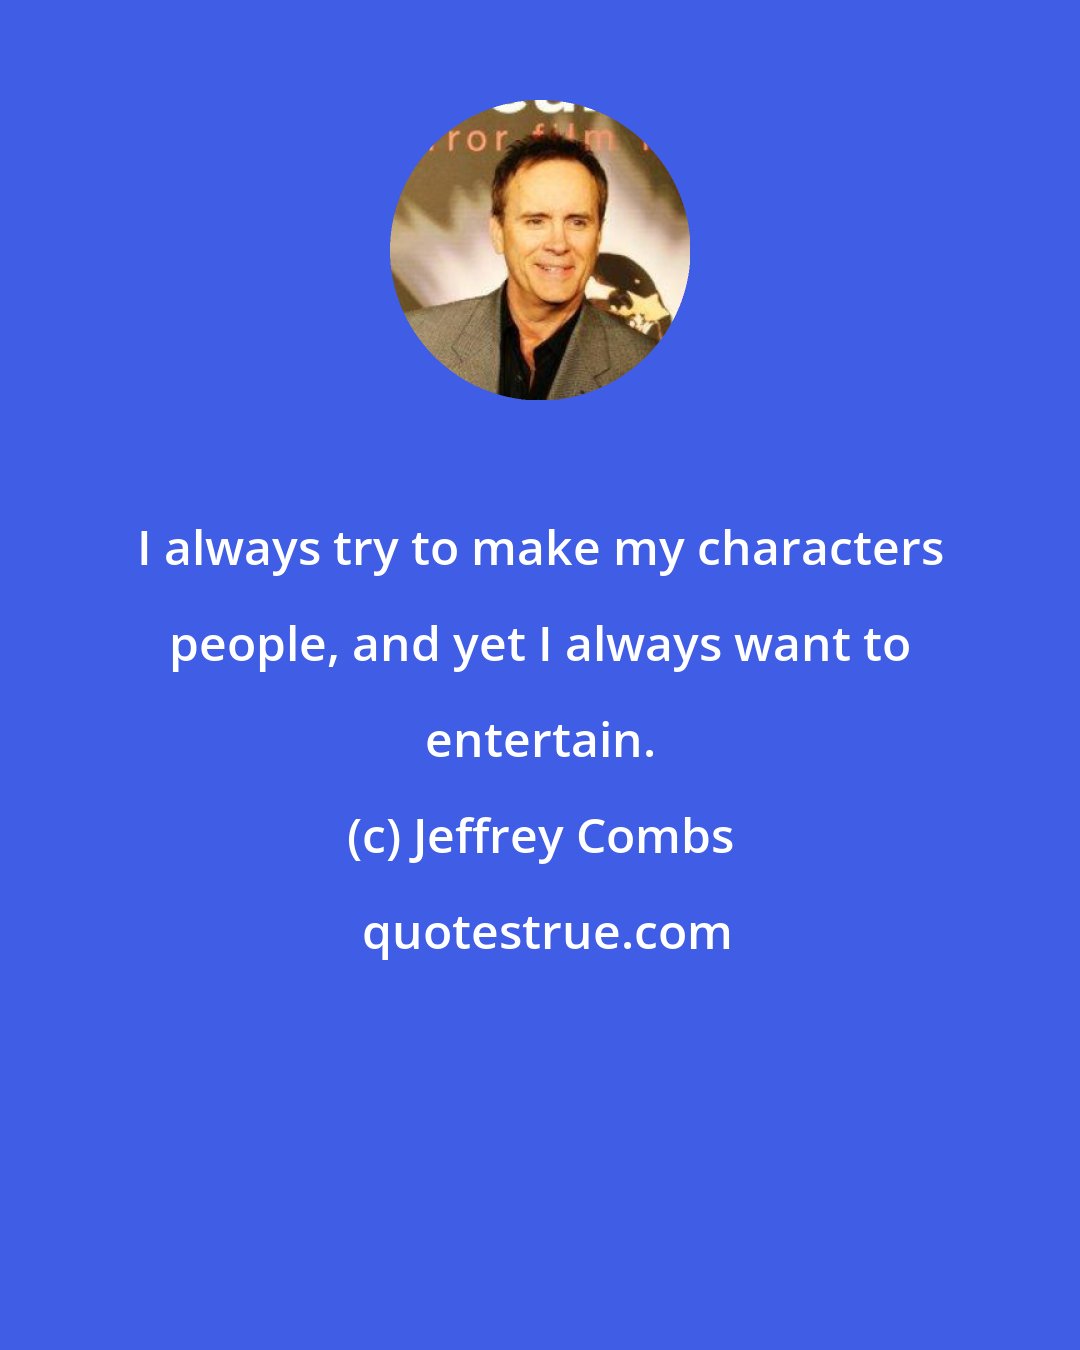 Jeffrey Combs: I always try to make my characters people, and yet I always want to entertain.